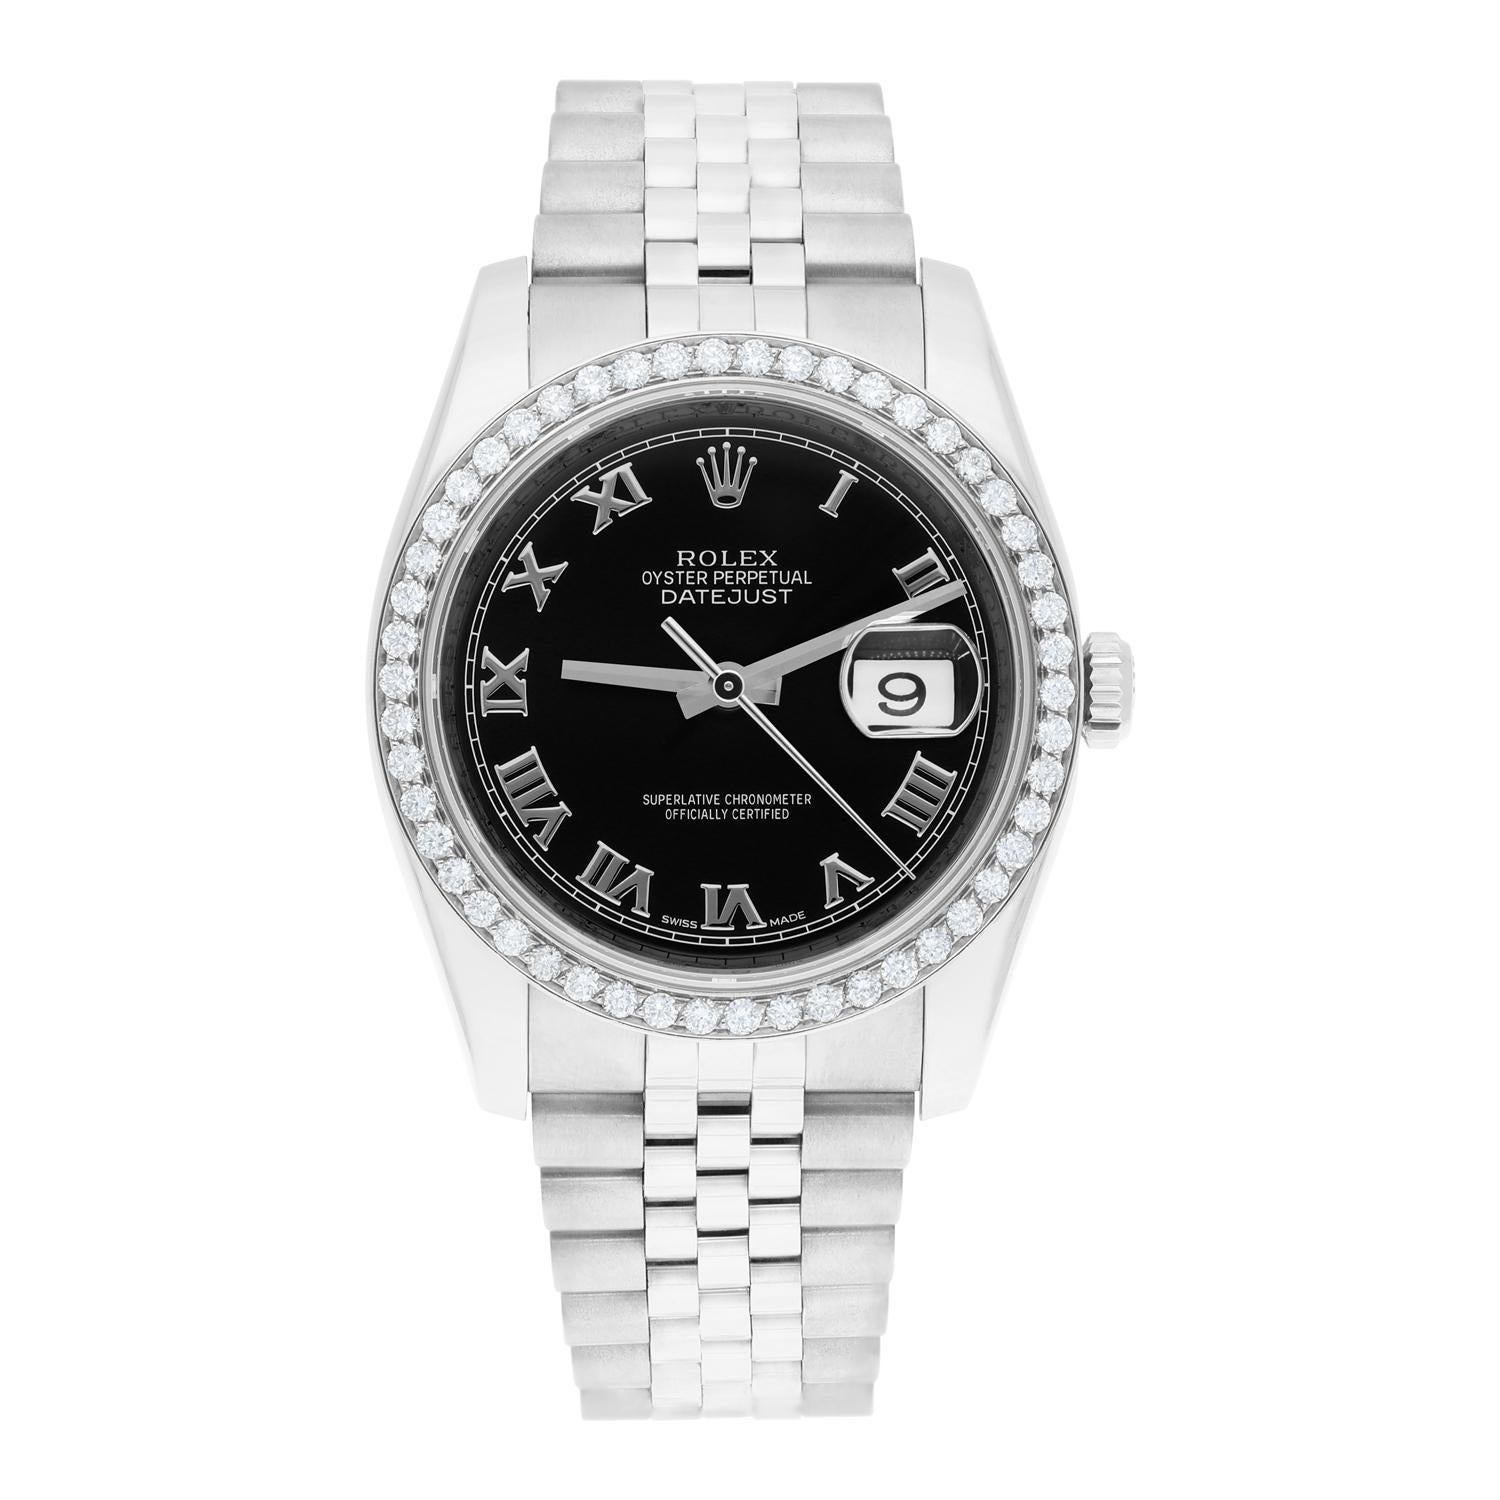 Brand: Rolex
Series: Datejust 
Model: 116234
Case Diameter: 36 mm
Bracelet: Jubilee band; stainless steel
Bezel: Custom Diamond Set
Dial: Black Roman
Carat Weight: 1.32 carats in total diamond weight
The sale includes a Rolex box and an appraisal